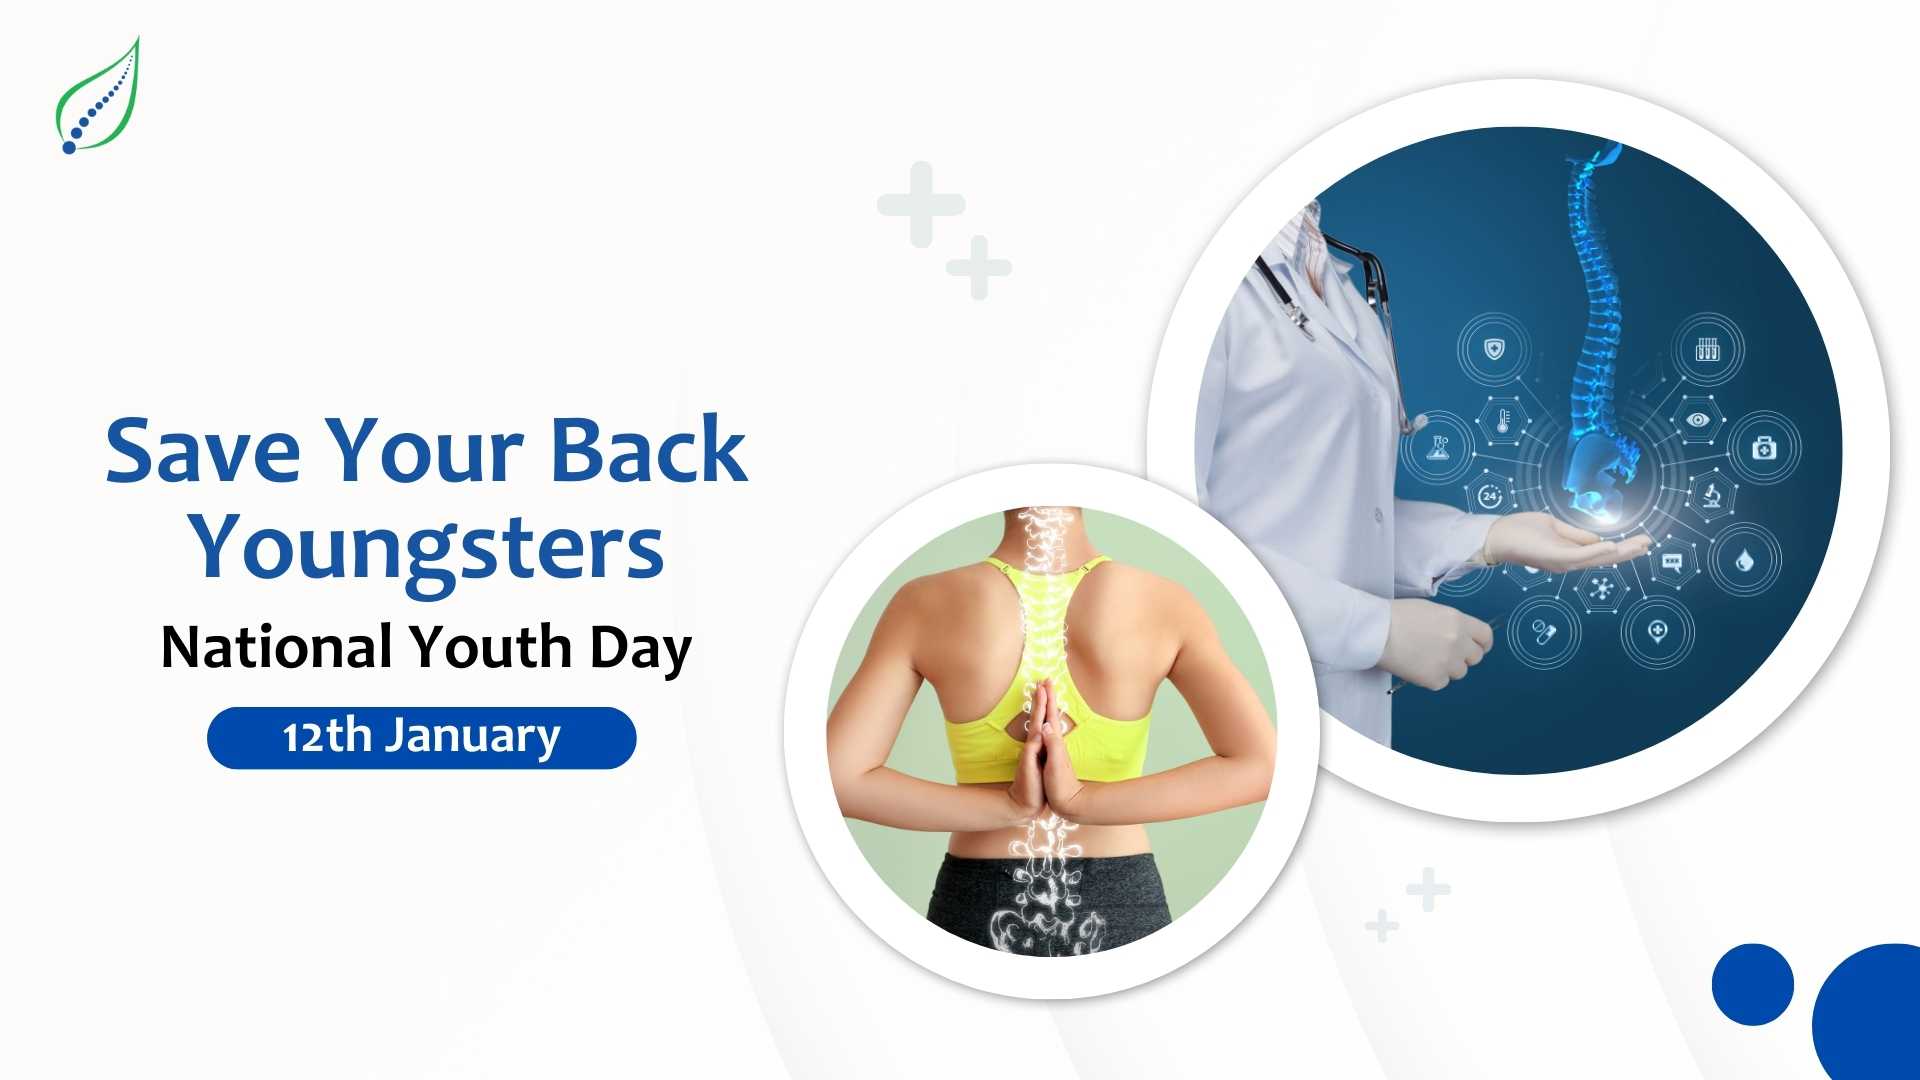 Save Your Back Youngsters - 12 January - National Youth Day